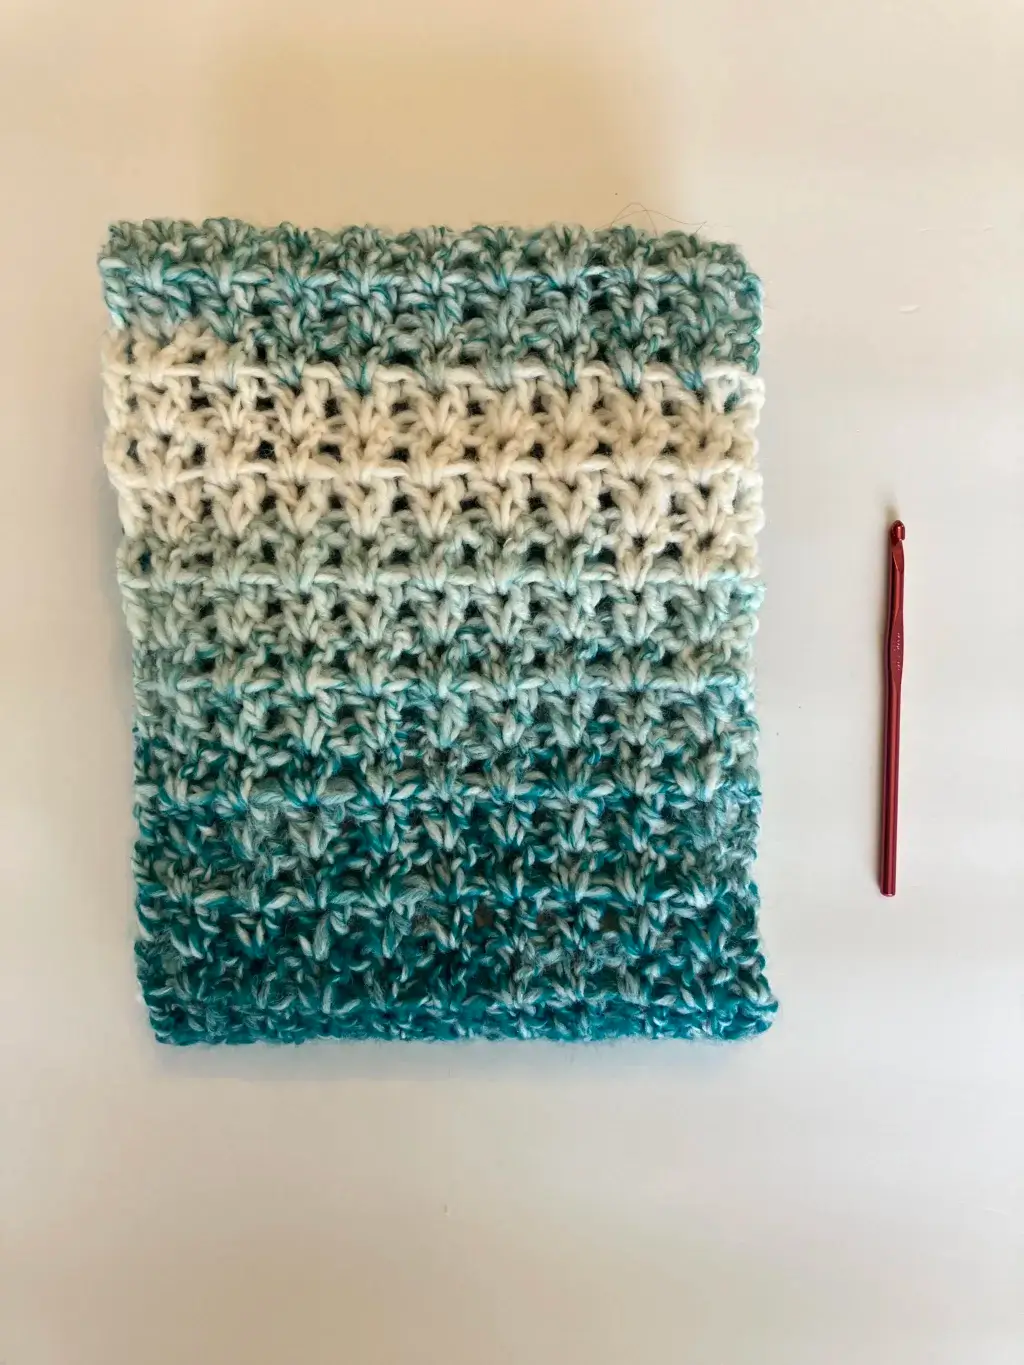 A crochet infinity scarf is folded and sitting on a white background. A red crochet hook is next to it.